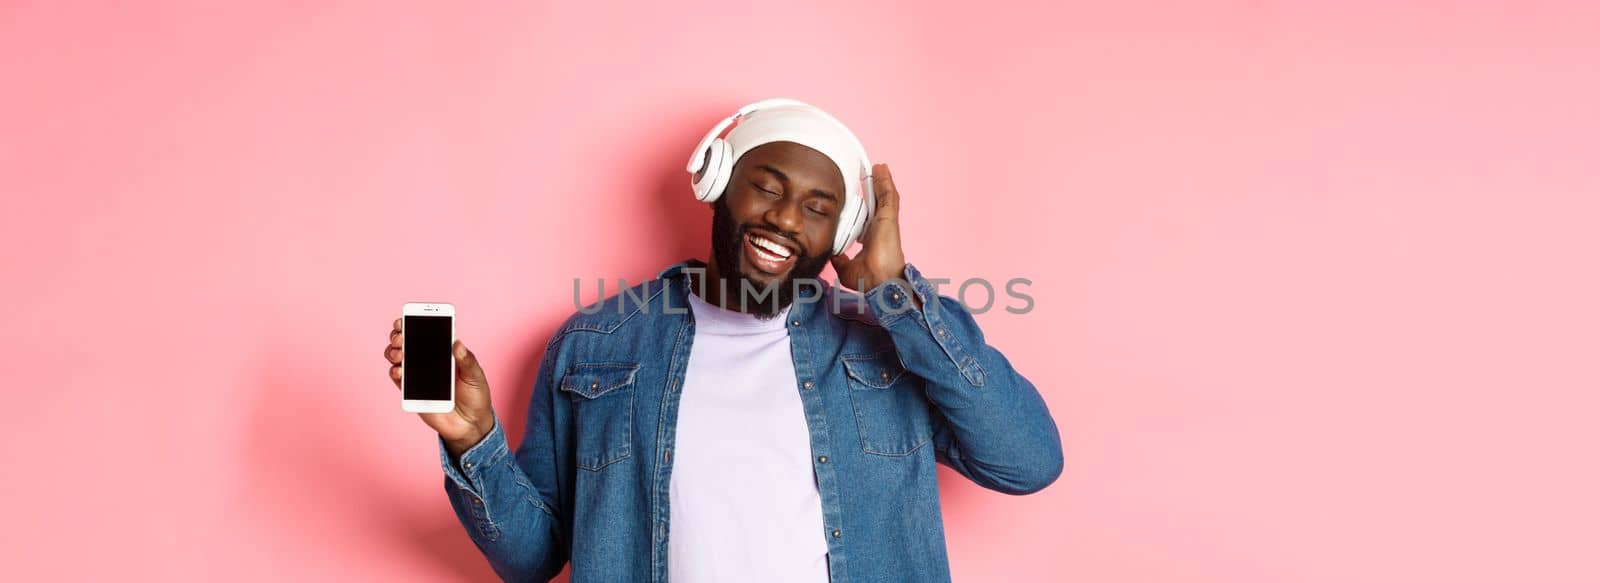 Carefree handsome Black man listening music in headphones, enjoying sound and showing smartphone screen, standing with pleased smile on face against pink background.